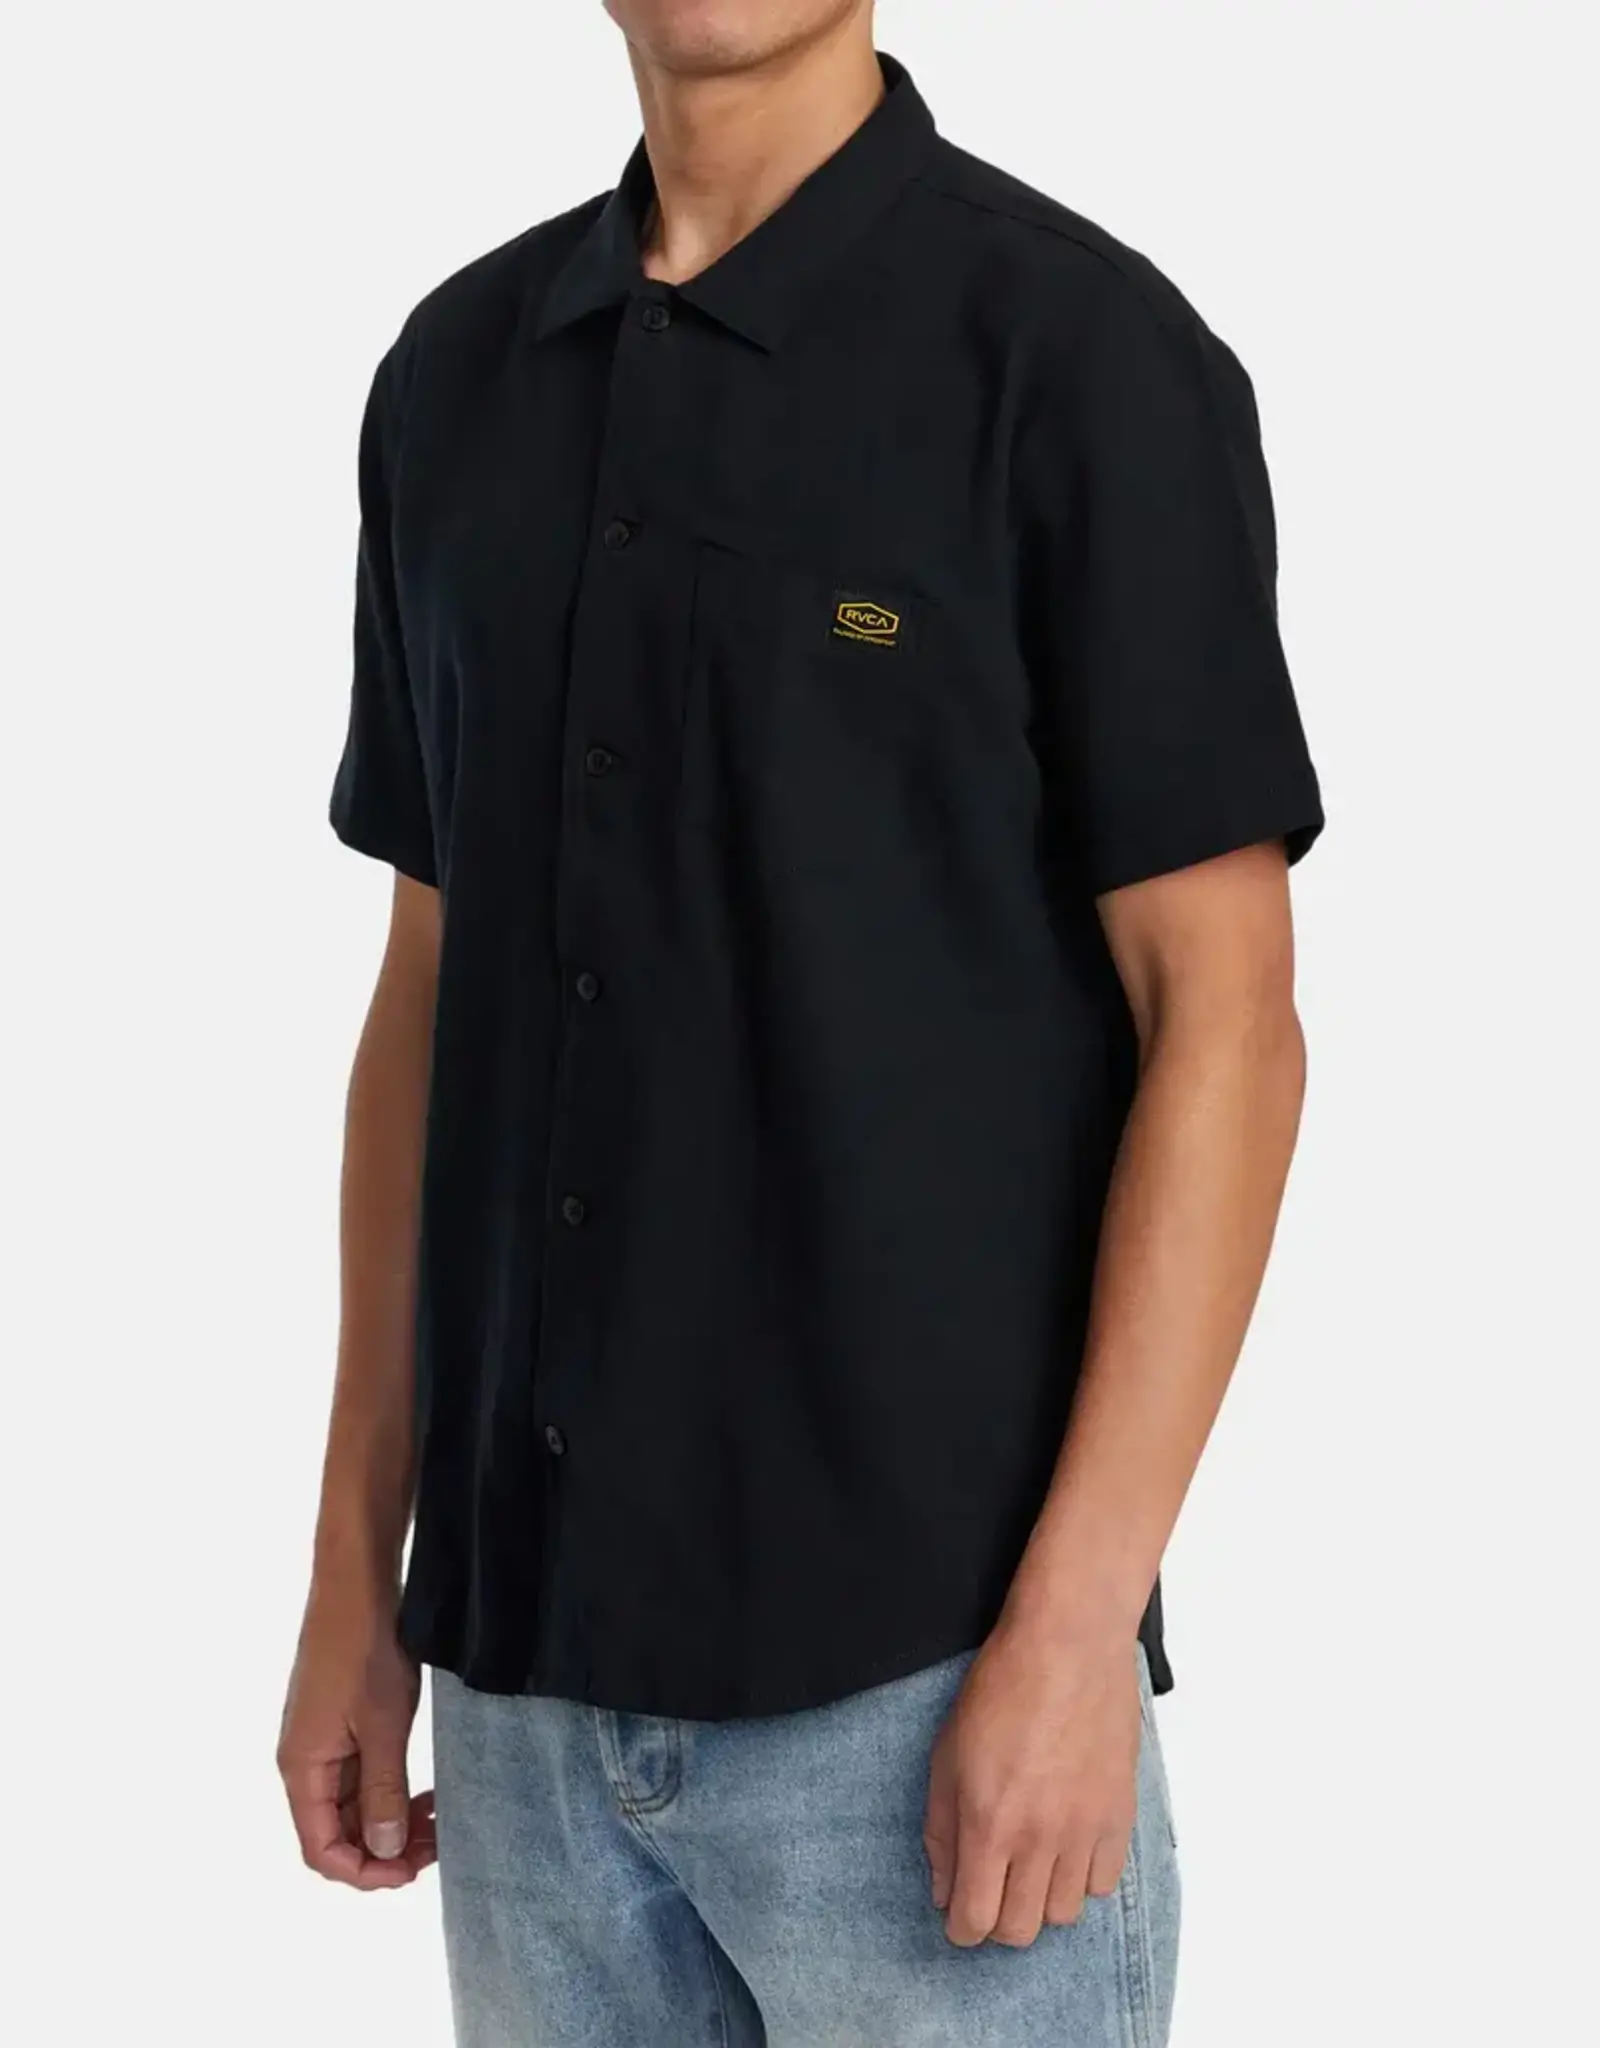 RVCA RECESSION COLLECTION DAY SHIFT SS SHIRT